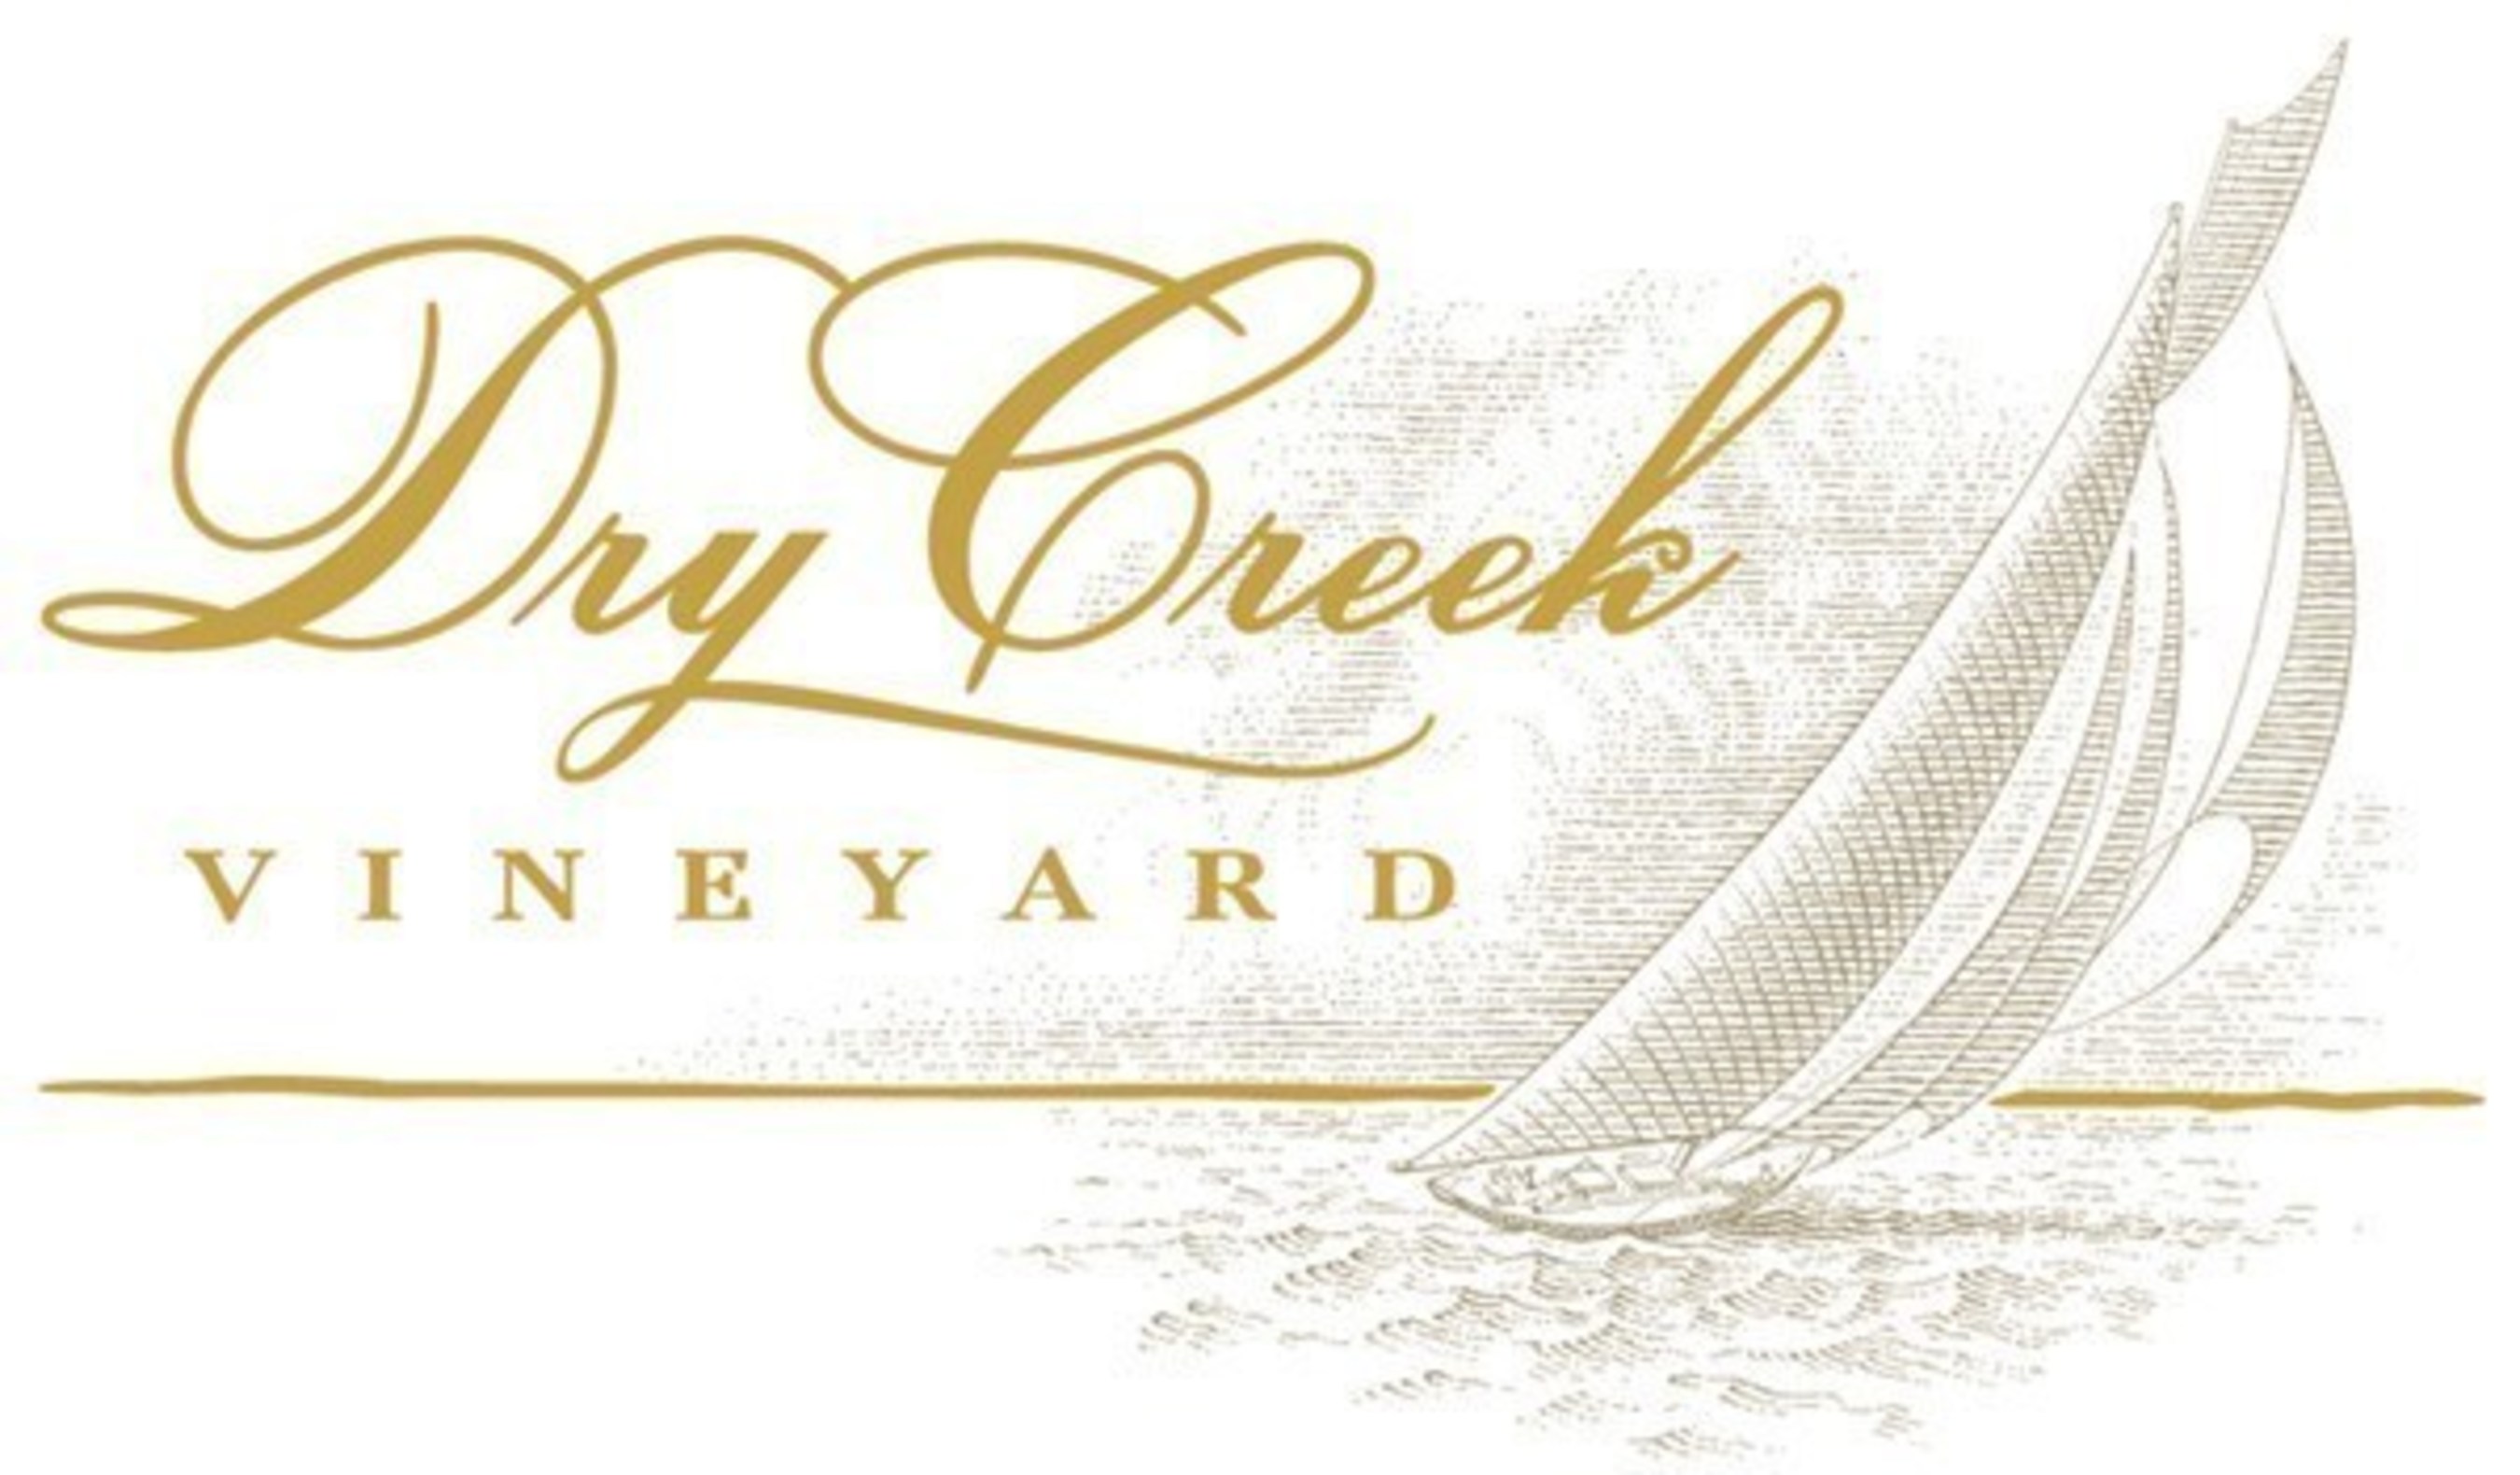 Dry Creek Vineyard Selected as Official Wine of the Louis Vuitton America's Cup World Series New York and Chicago